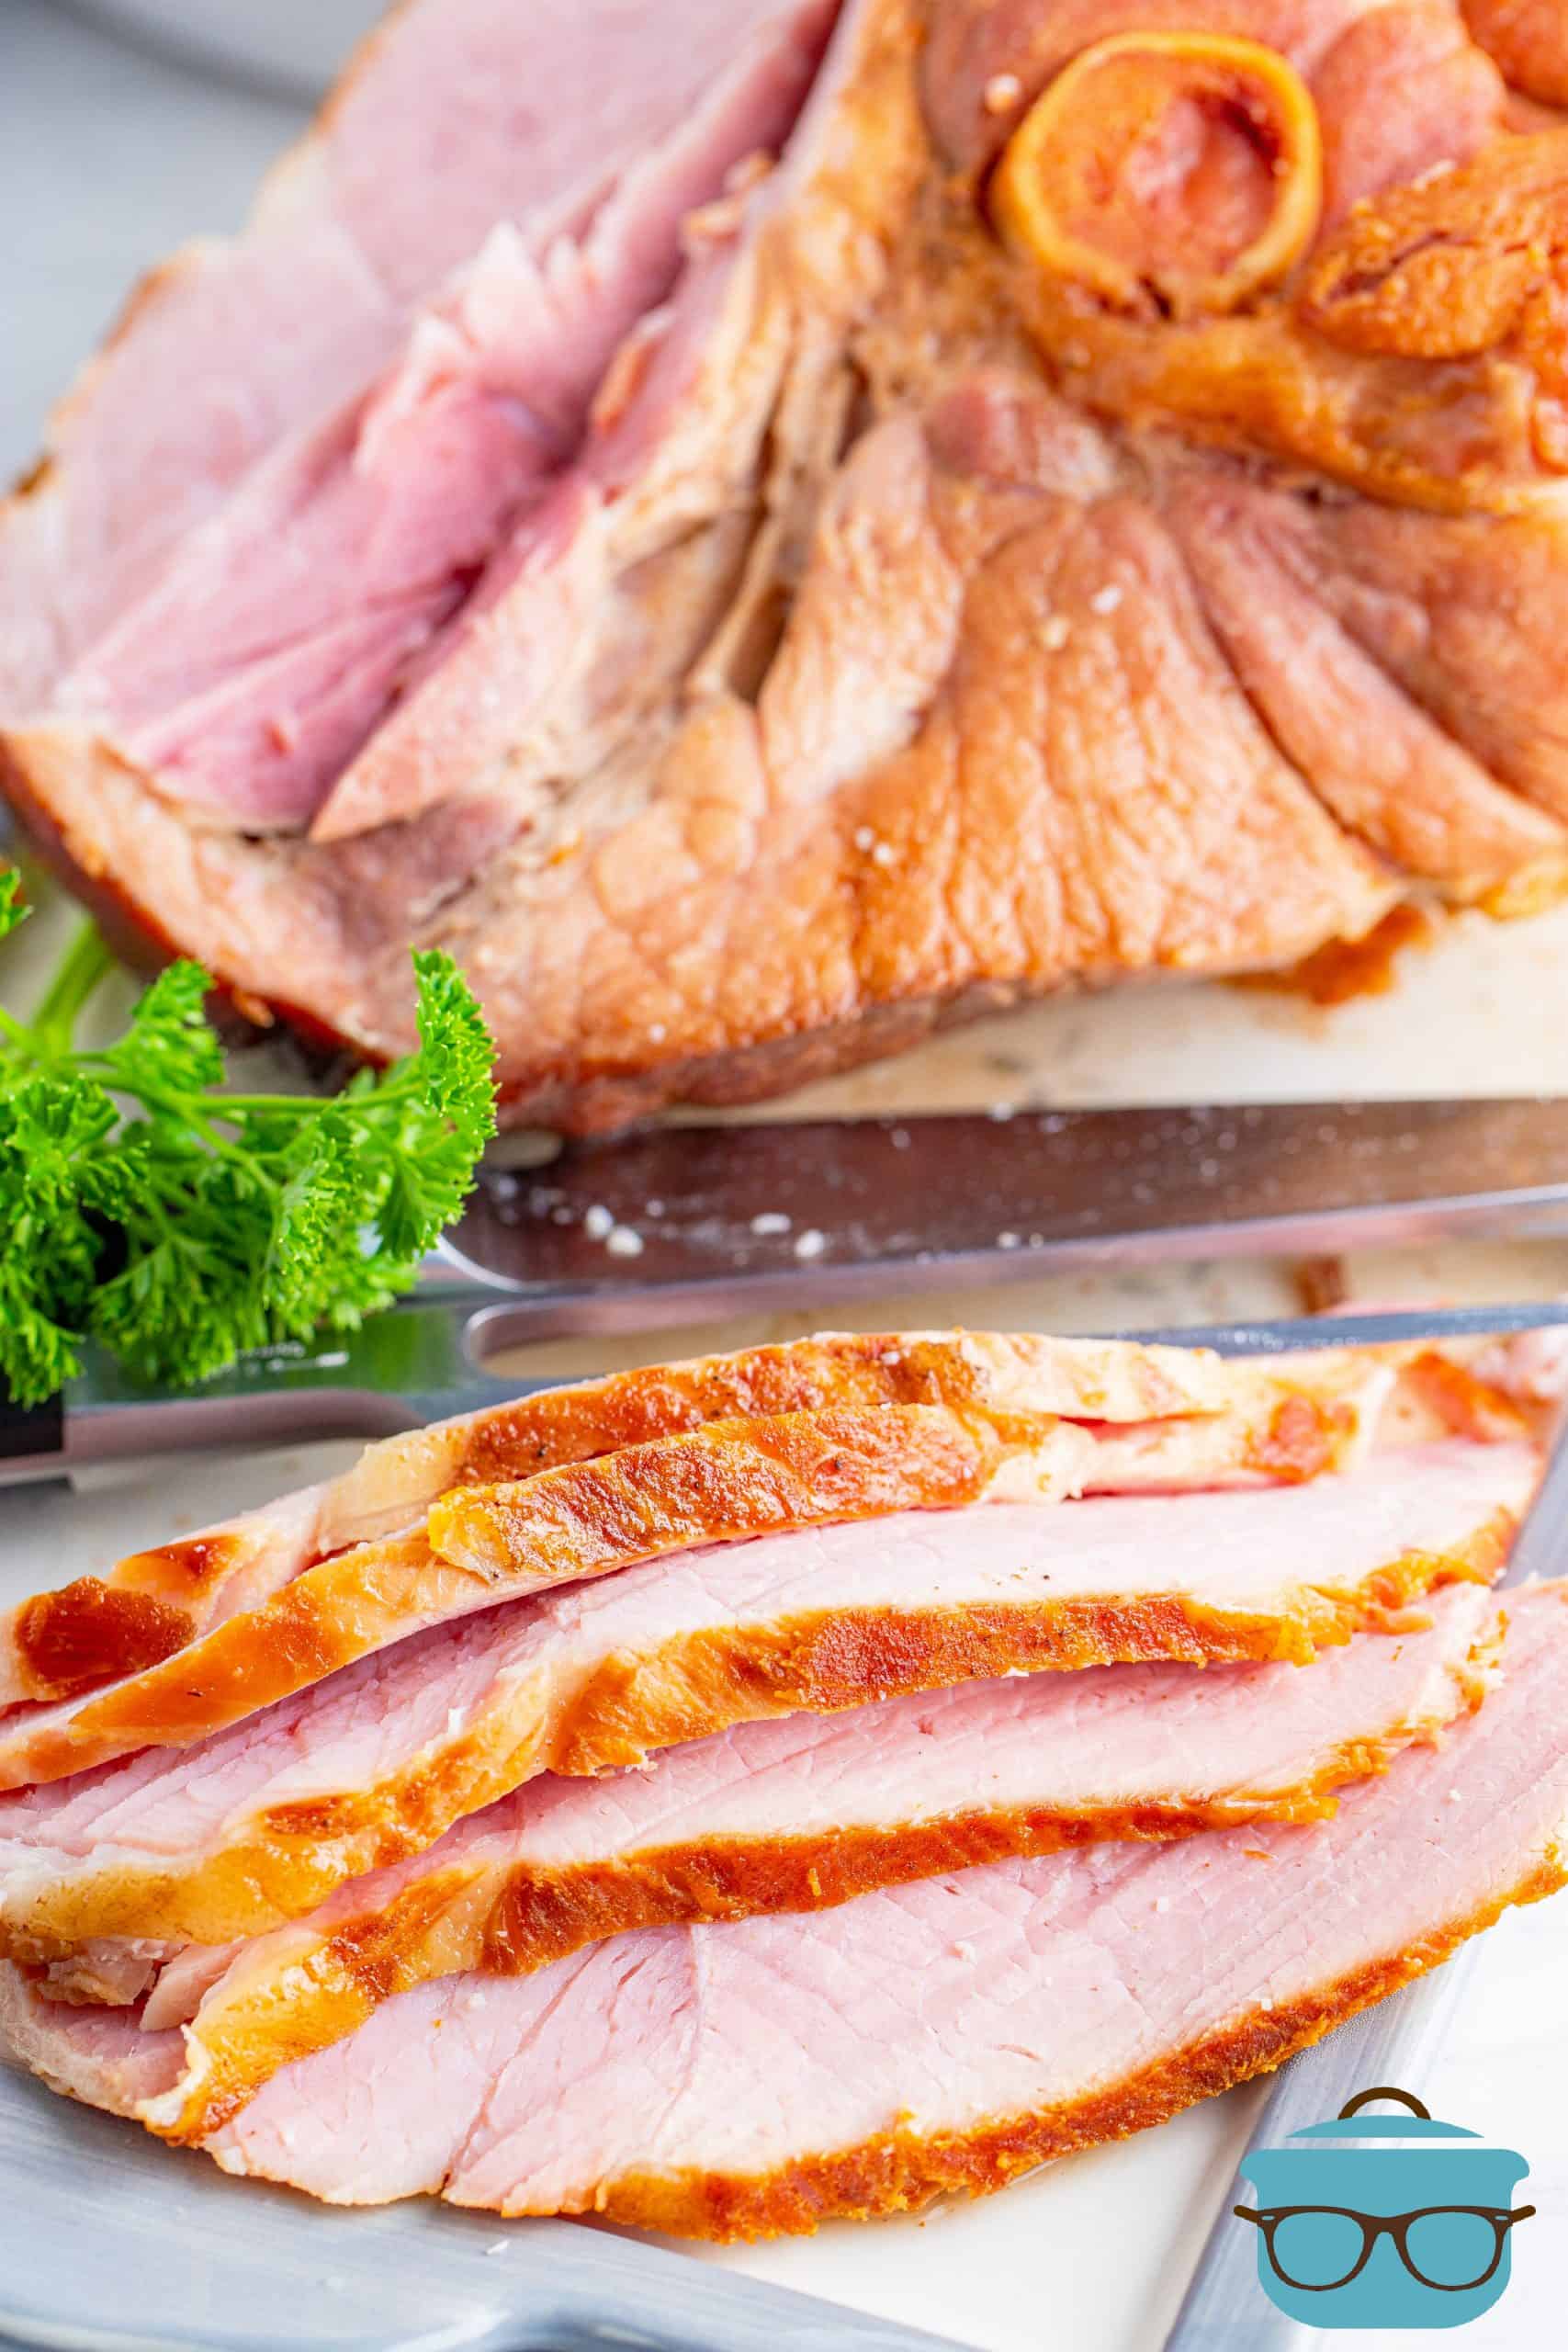 Instant Pot Sliced ham, slices shown on a white plate with the whole ham shown in the background.